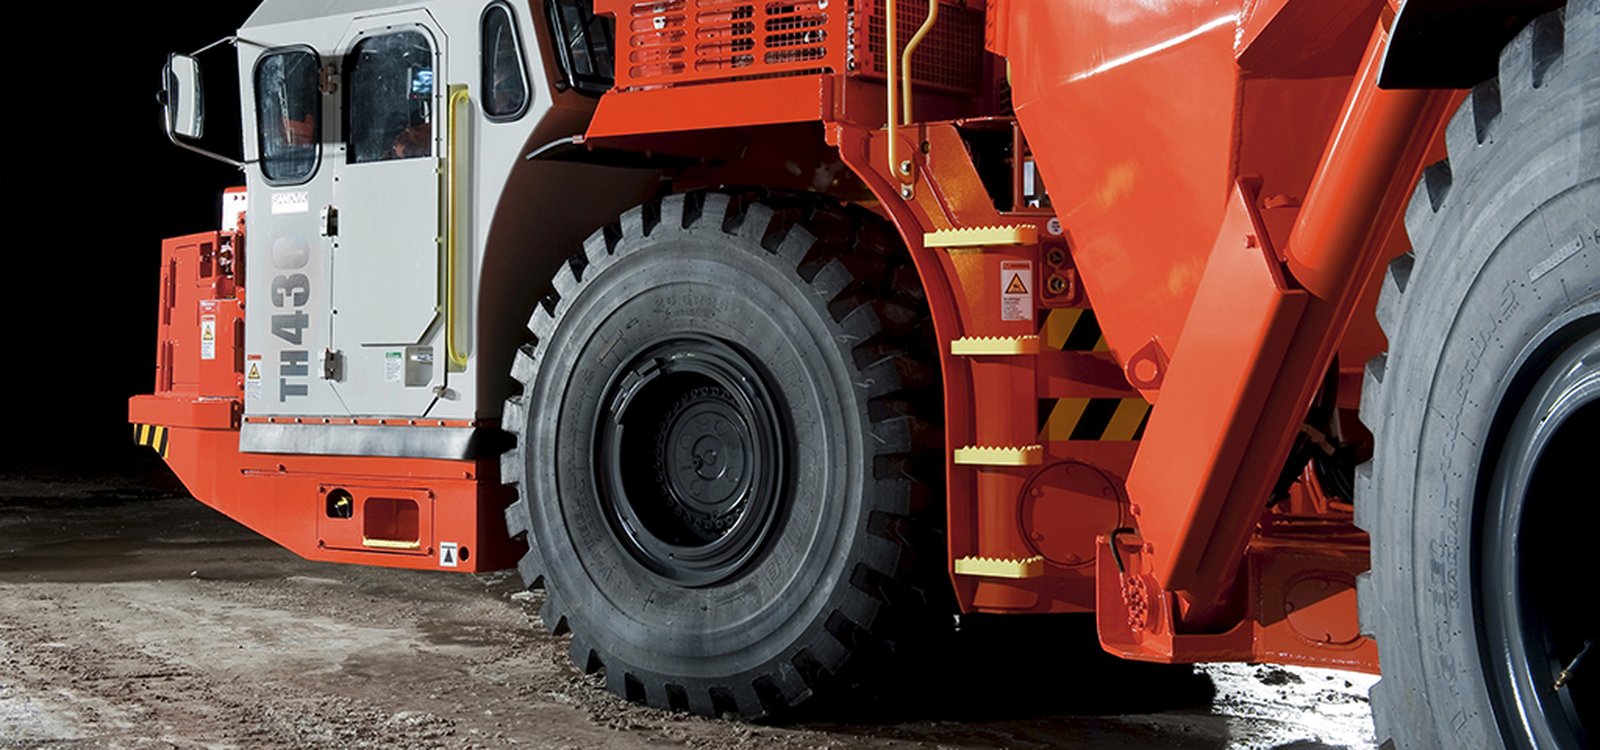 Rubber liners at the bottom of trucks can reduce the strength of vibrations and noise to which drivers are exposed.